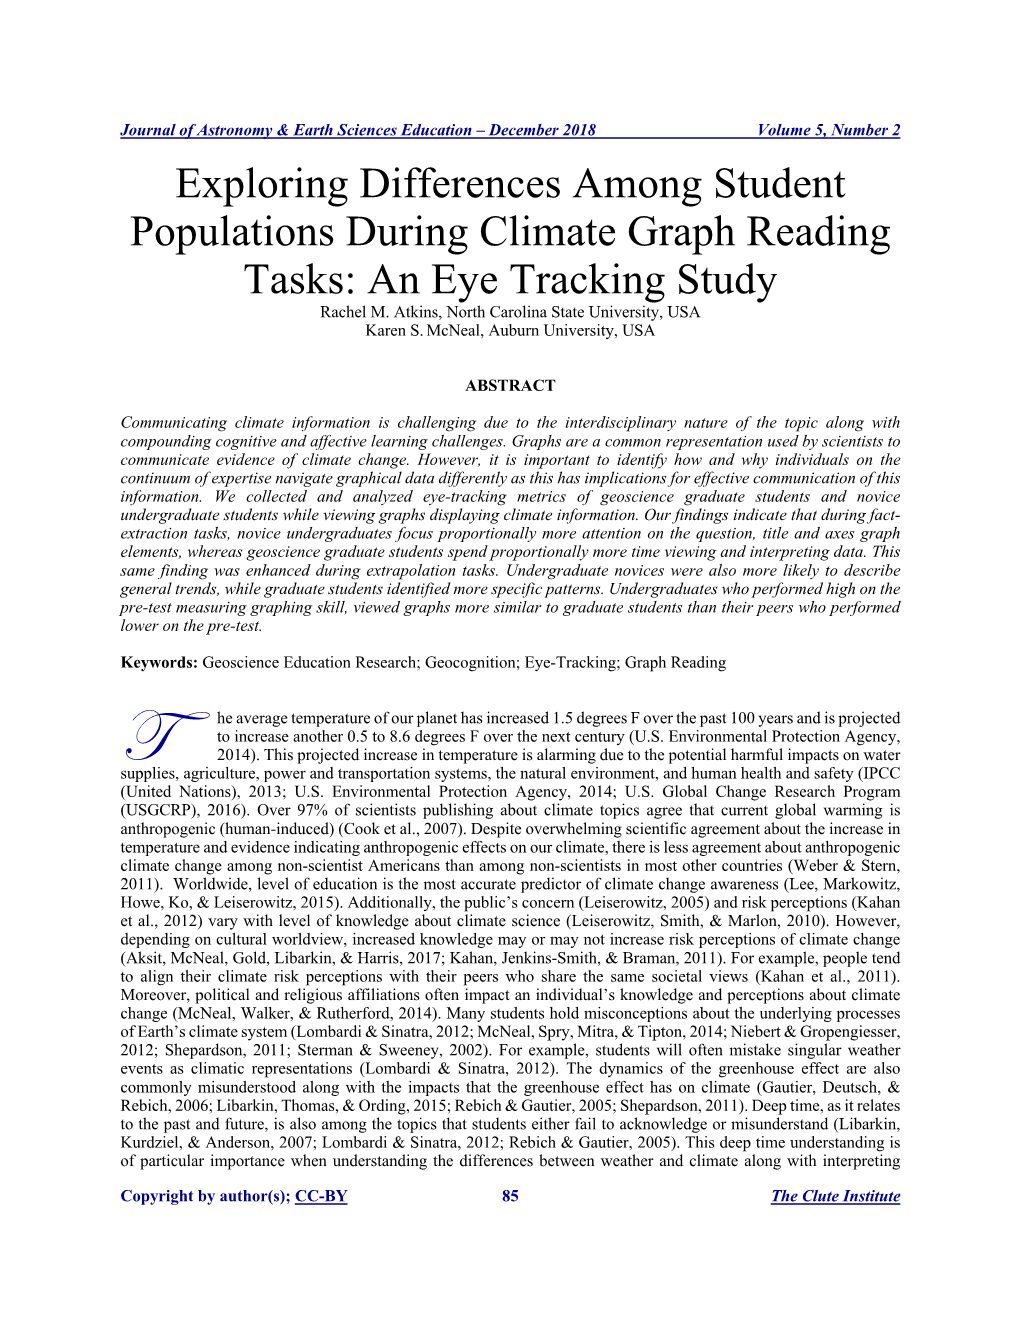 Exploring Differences Among Student Populations During Climate Graph Reading Tasks: an Eye Tracking Study Rachel M